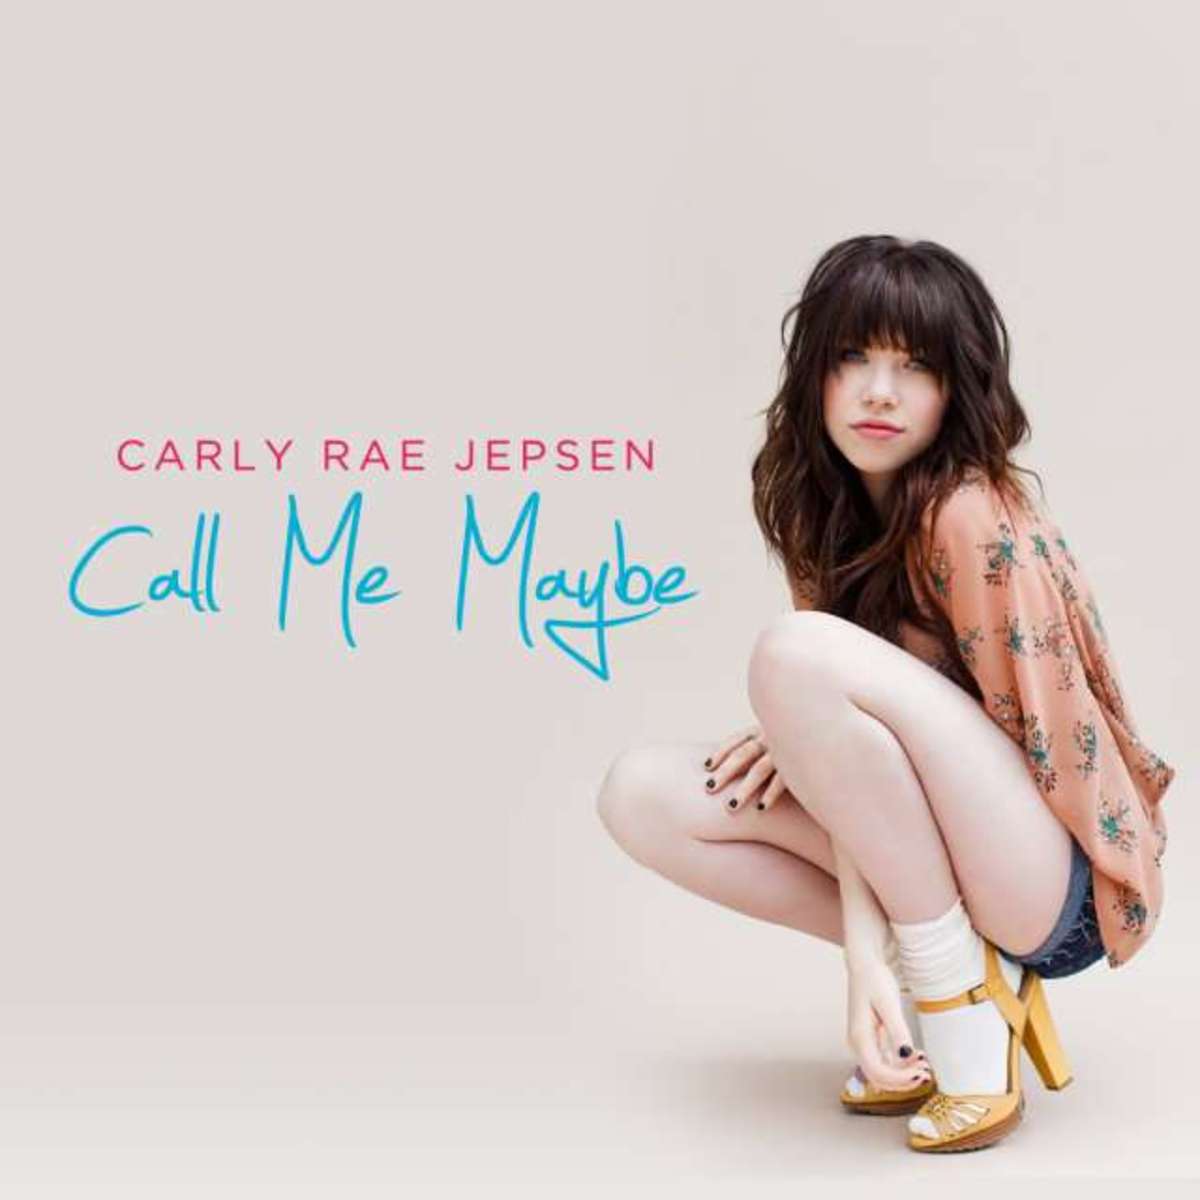 carly-rae-jepsen-call-me-maybe-cover-art